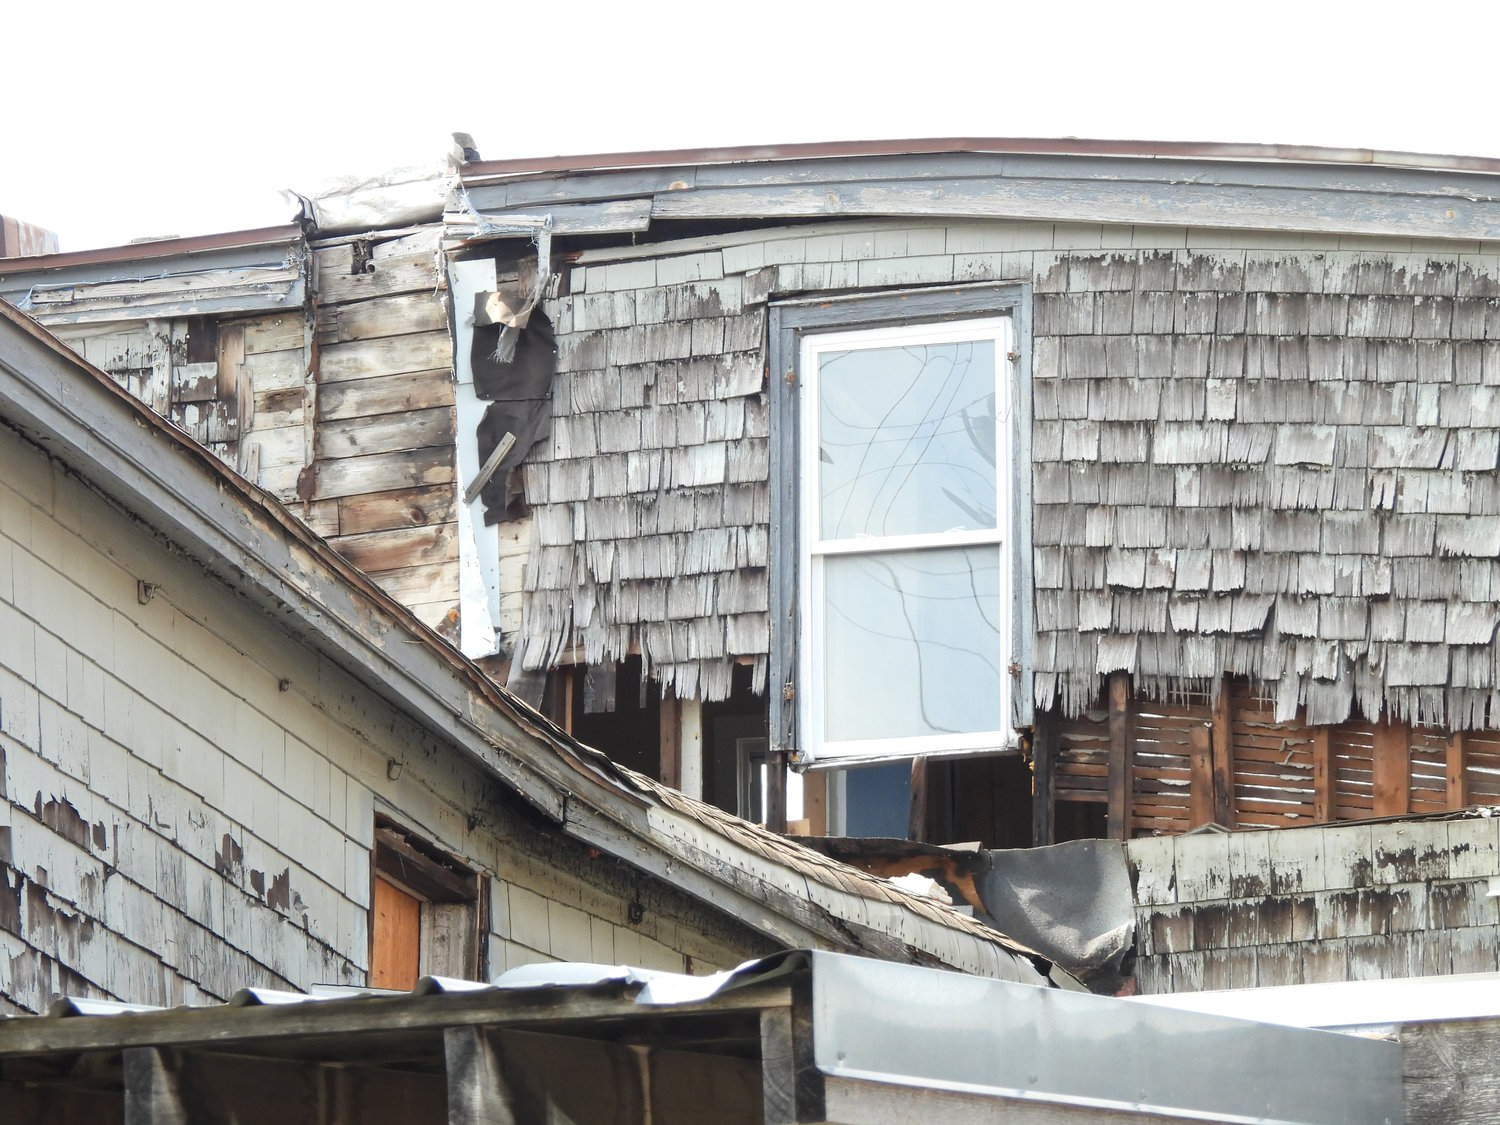 A view of the back of a structure at 140 Madison St., where the building’s wall has given way. Oneida officials have ruled the structure is unsafe and ordered its demolition within 90 days.